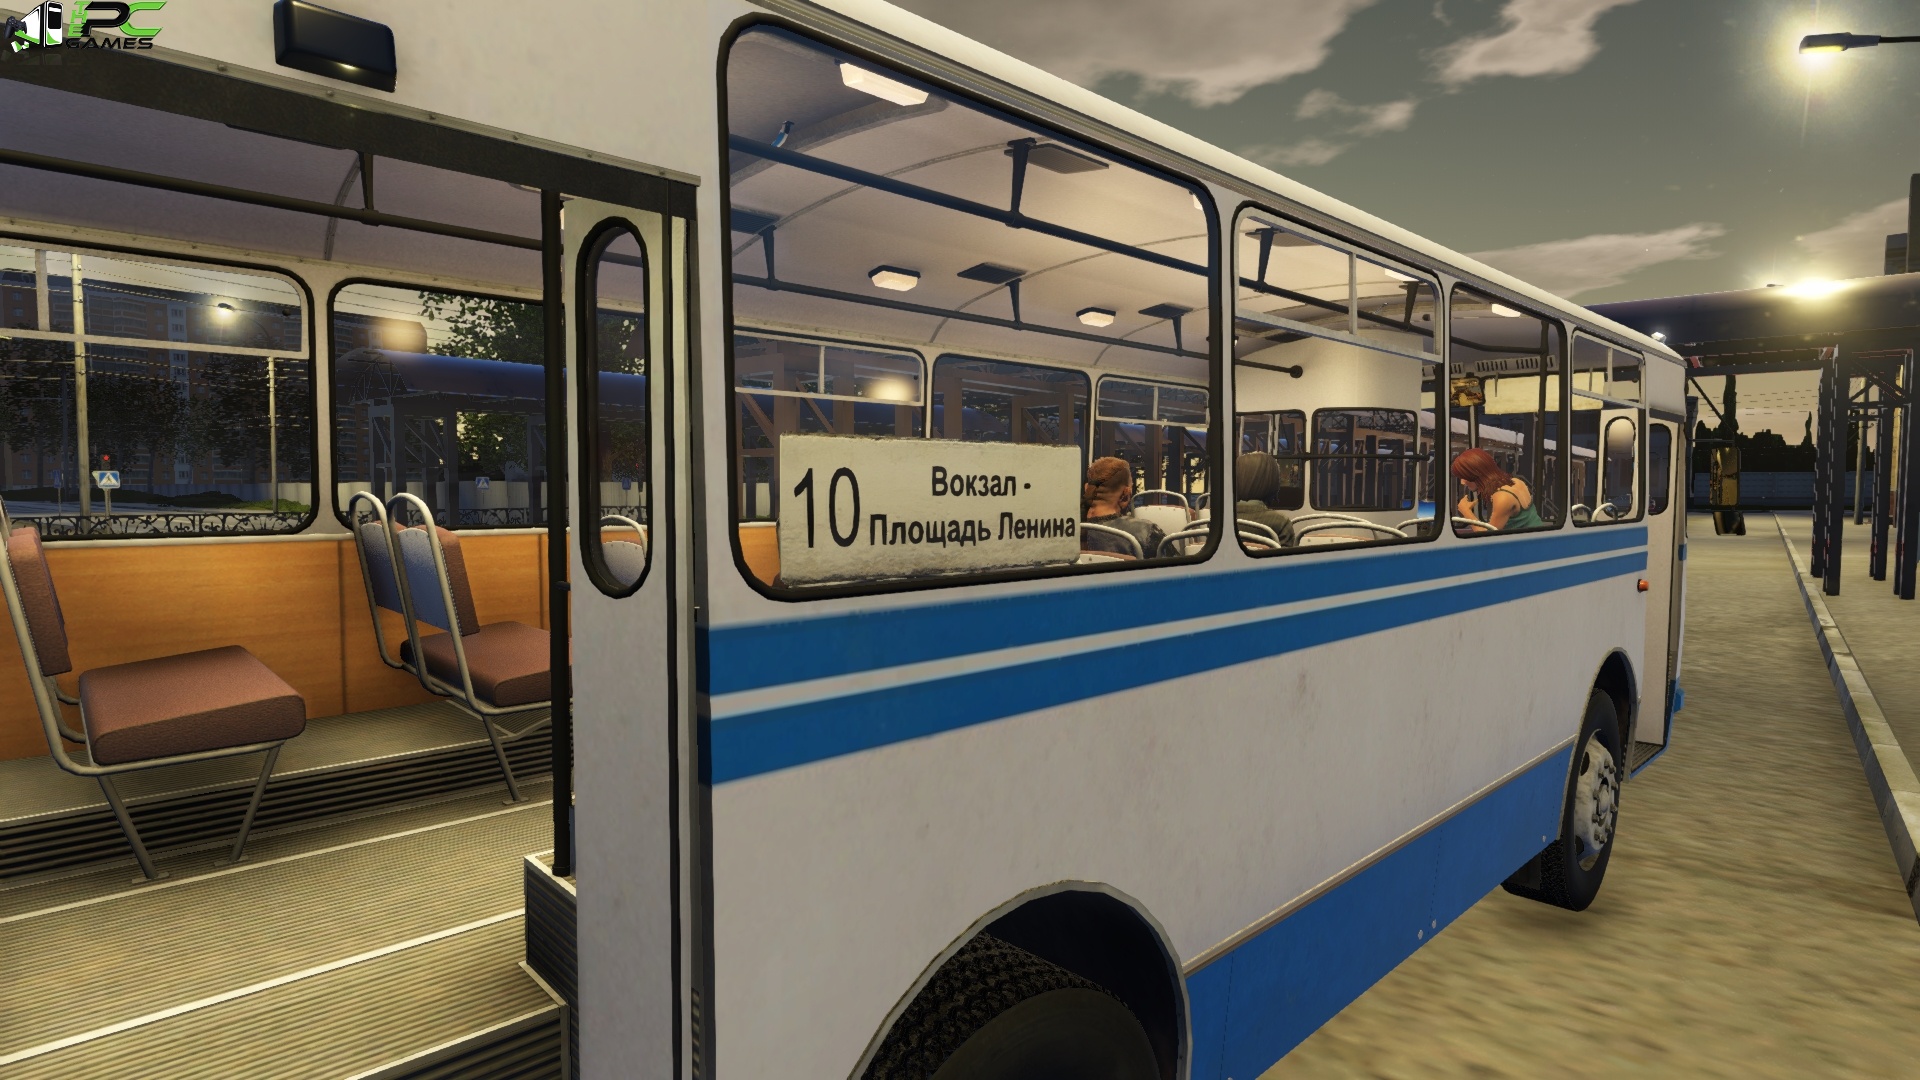 Bus driving ppsspp game